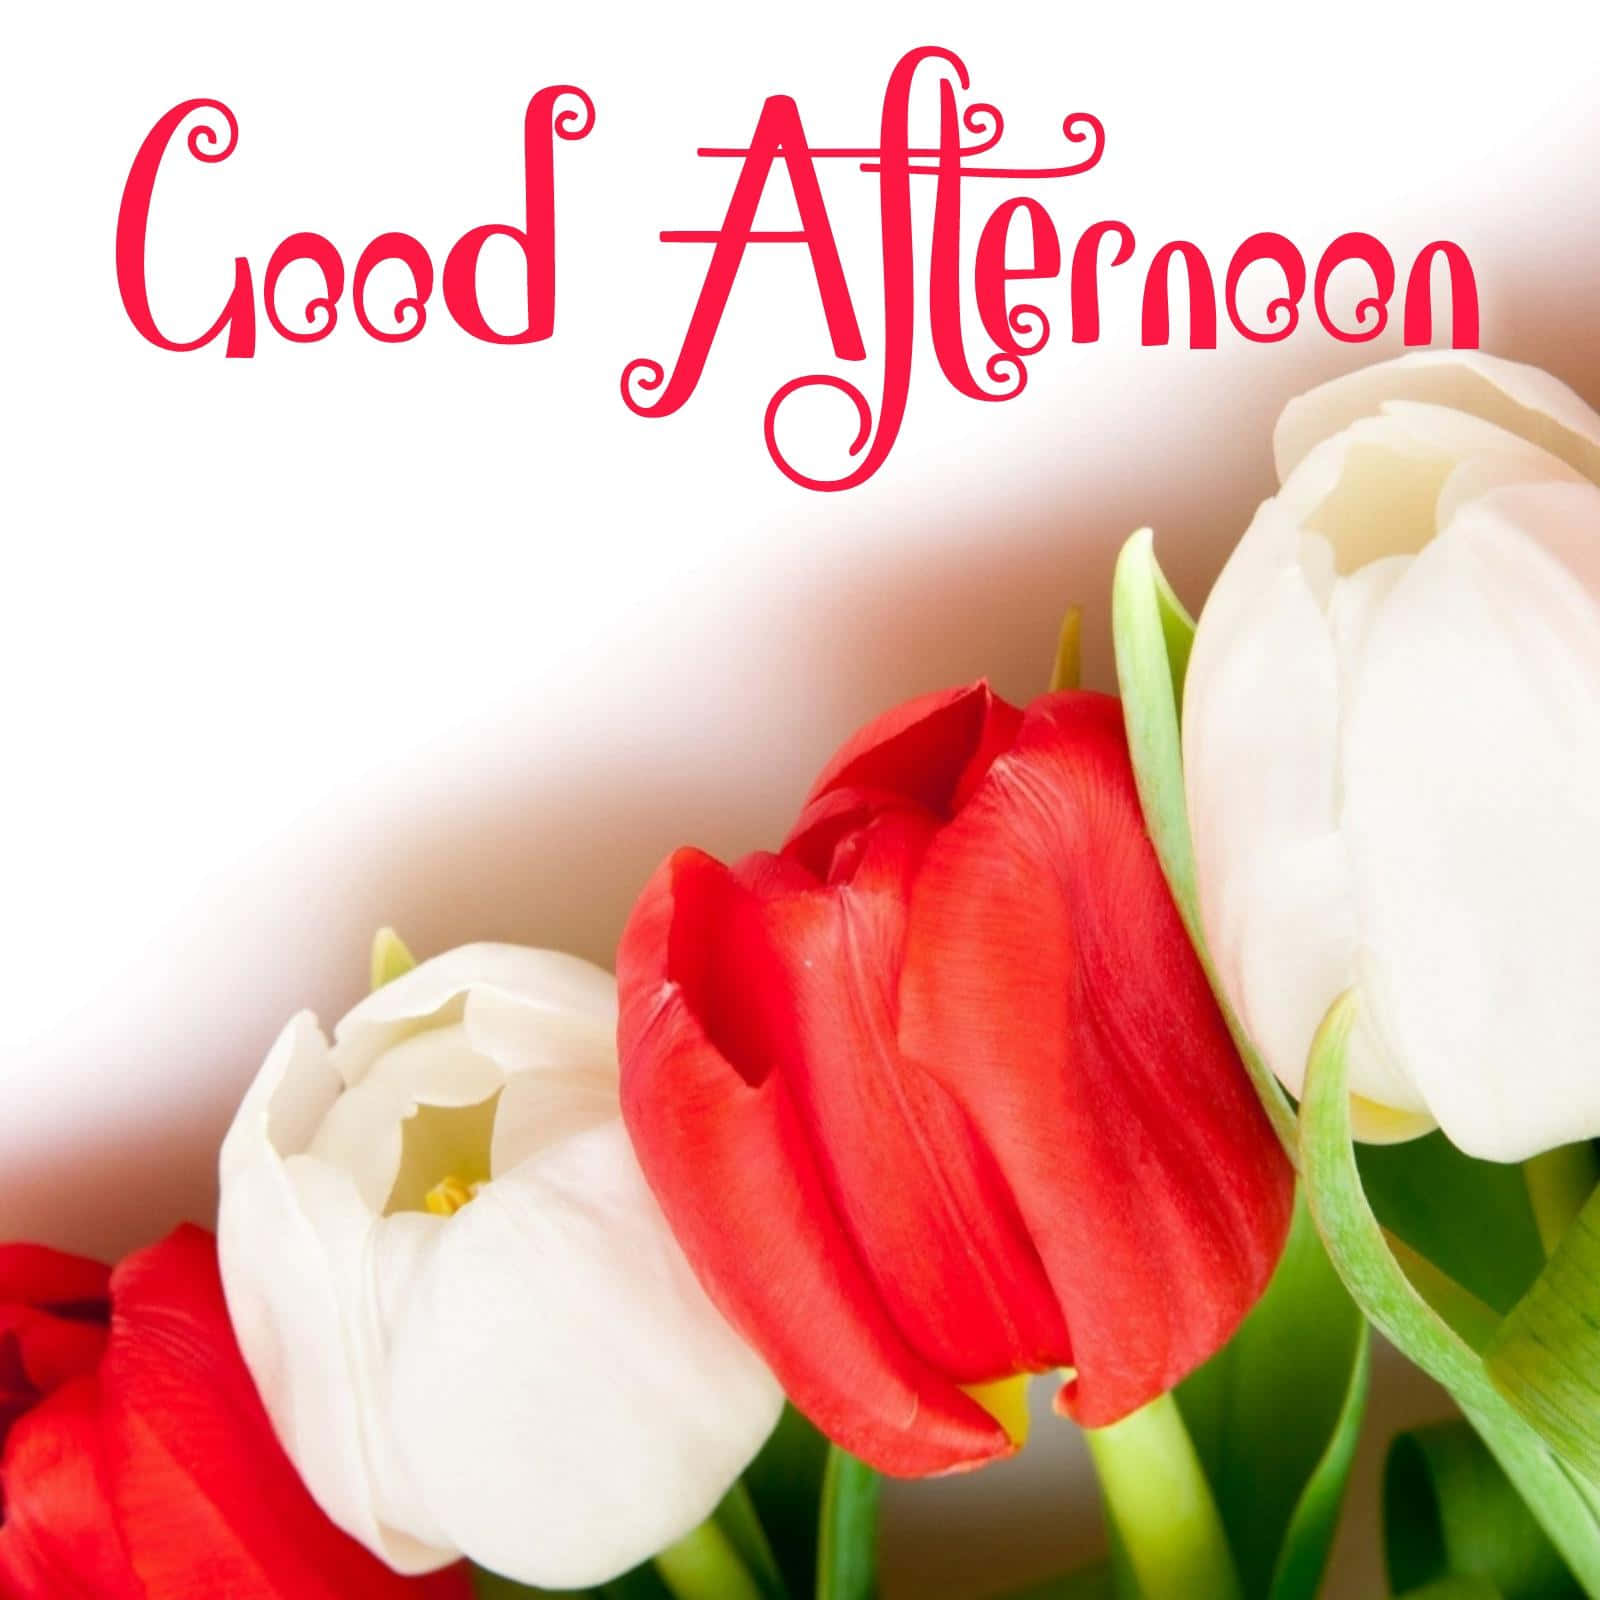 Download Good Afternoon Greetings Tulips Picture | Wallpapers.com